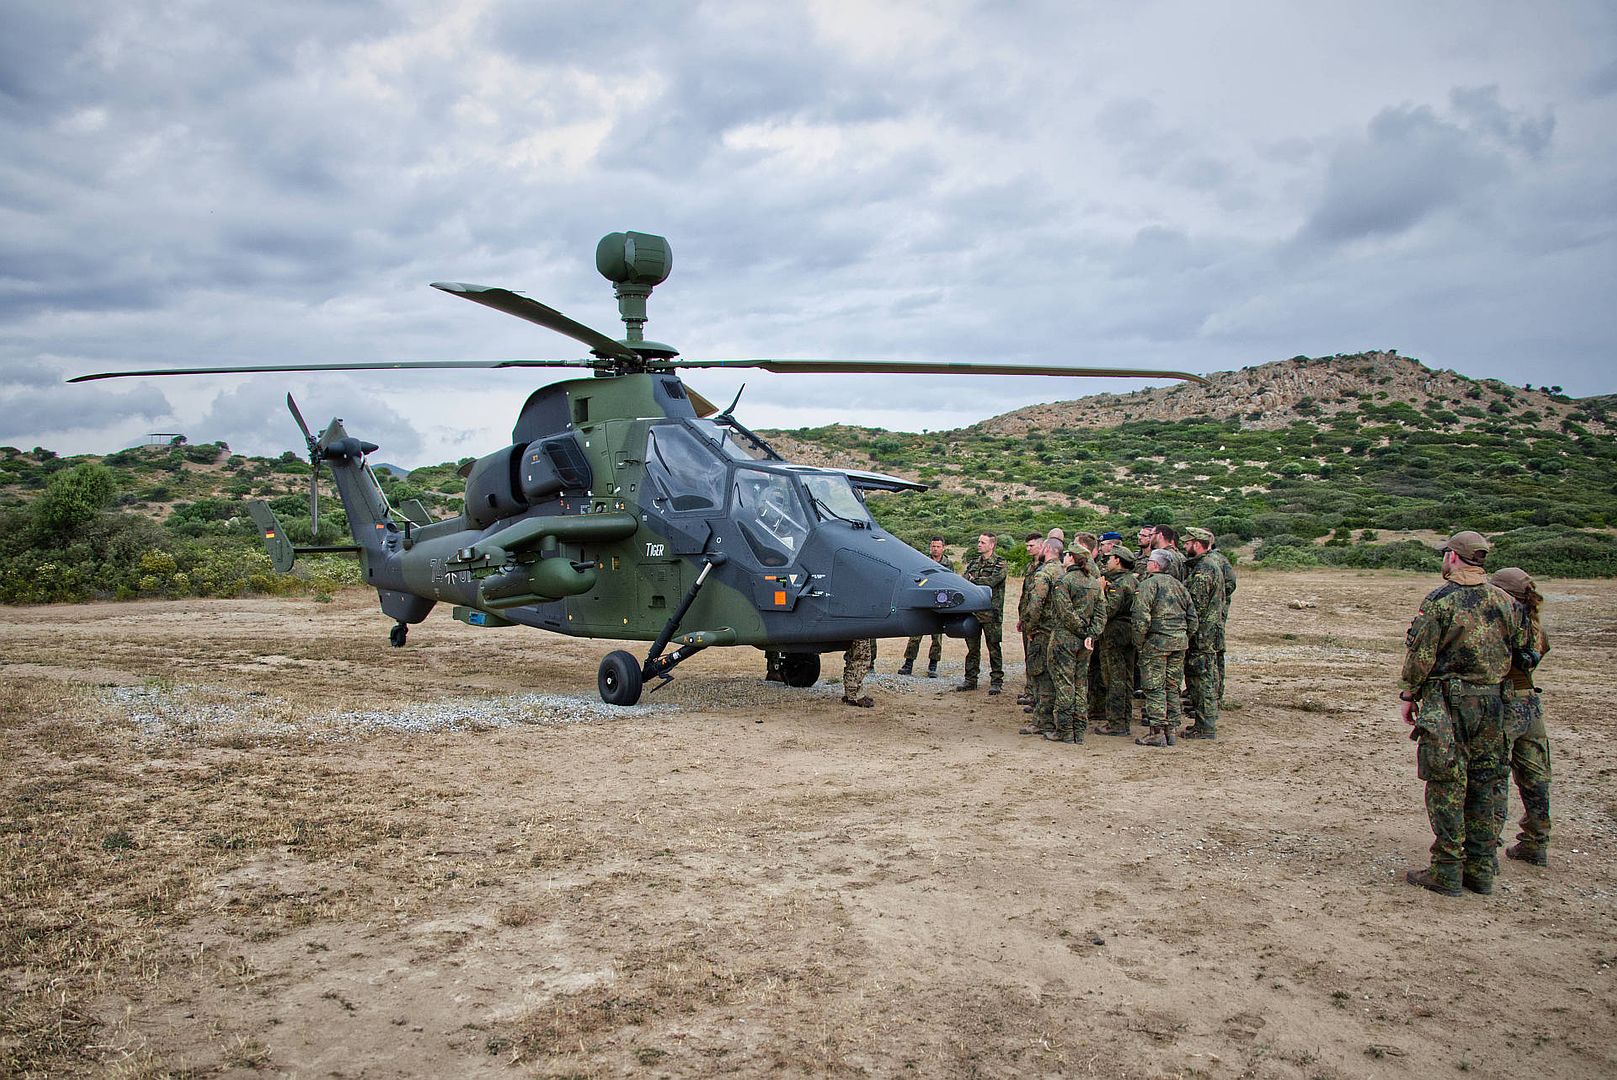 German Army Medics Receive Instruction On How To Rescue Wounded From A Helicopter During Exercise Noble Jump 23 In Sardinia Italy May 8